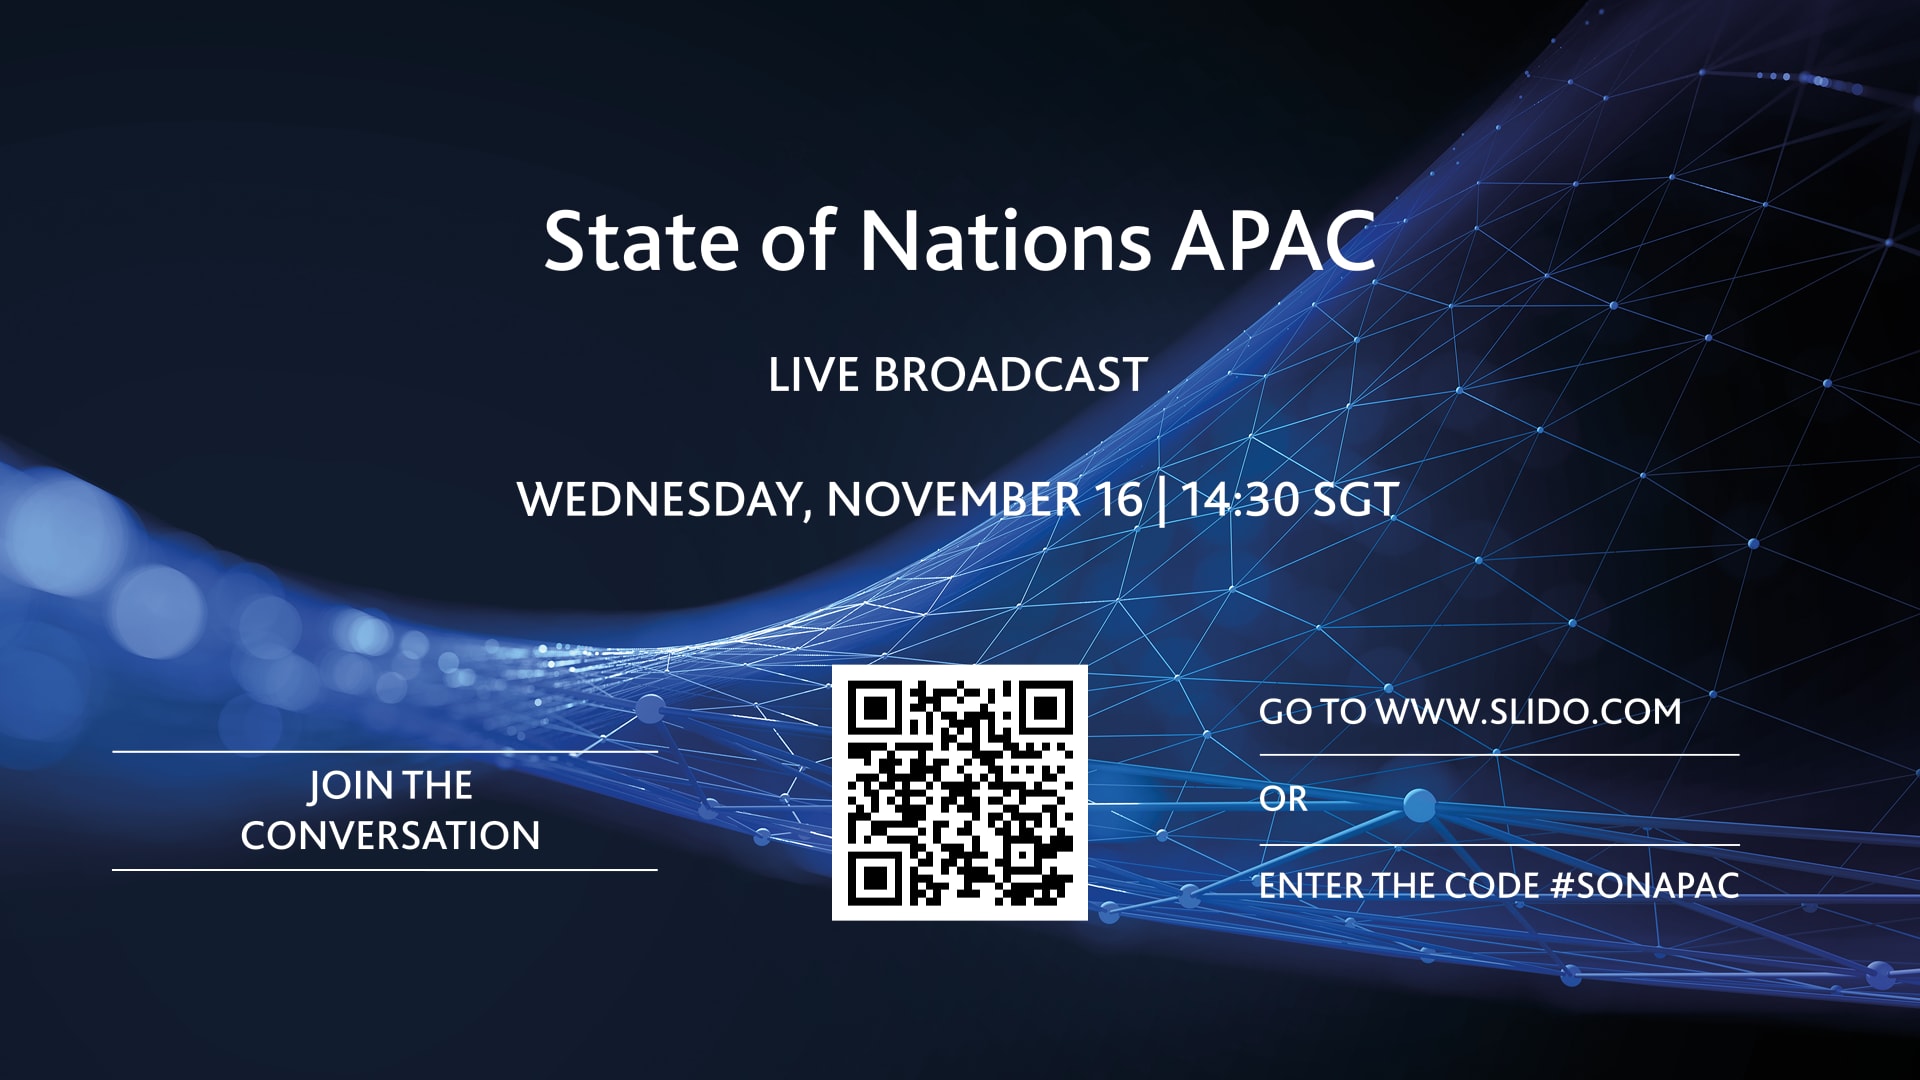 State of Nations APAC